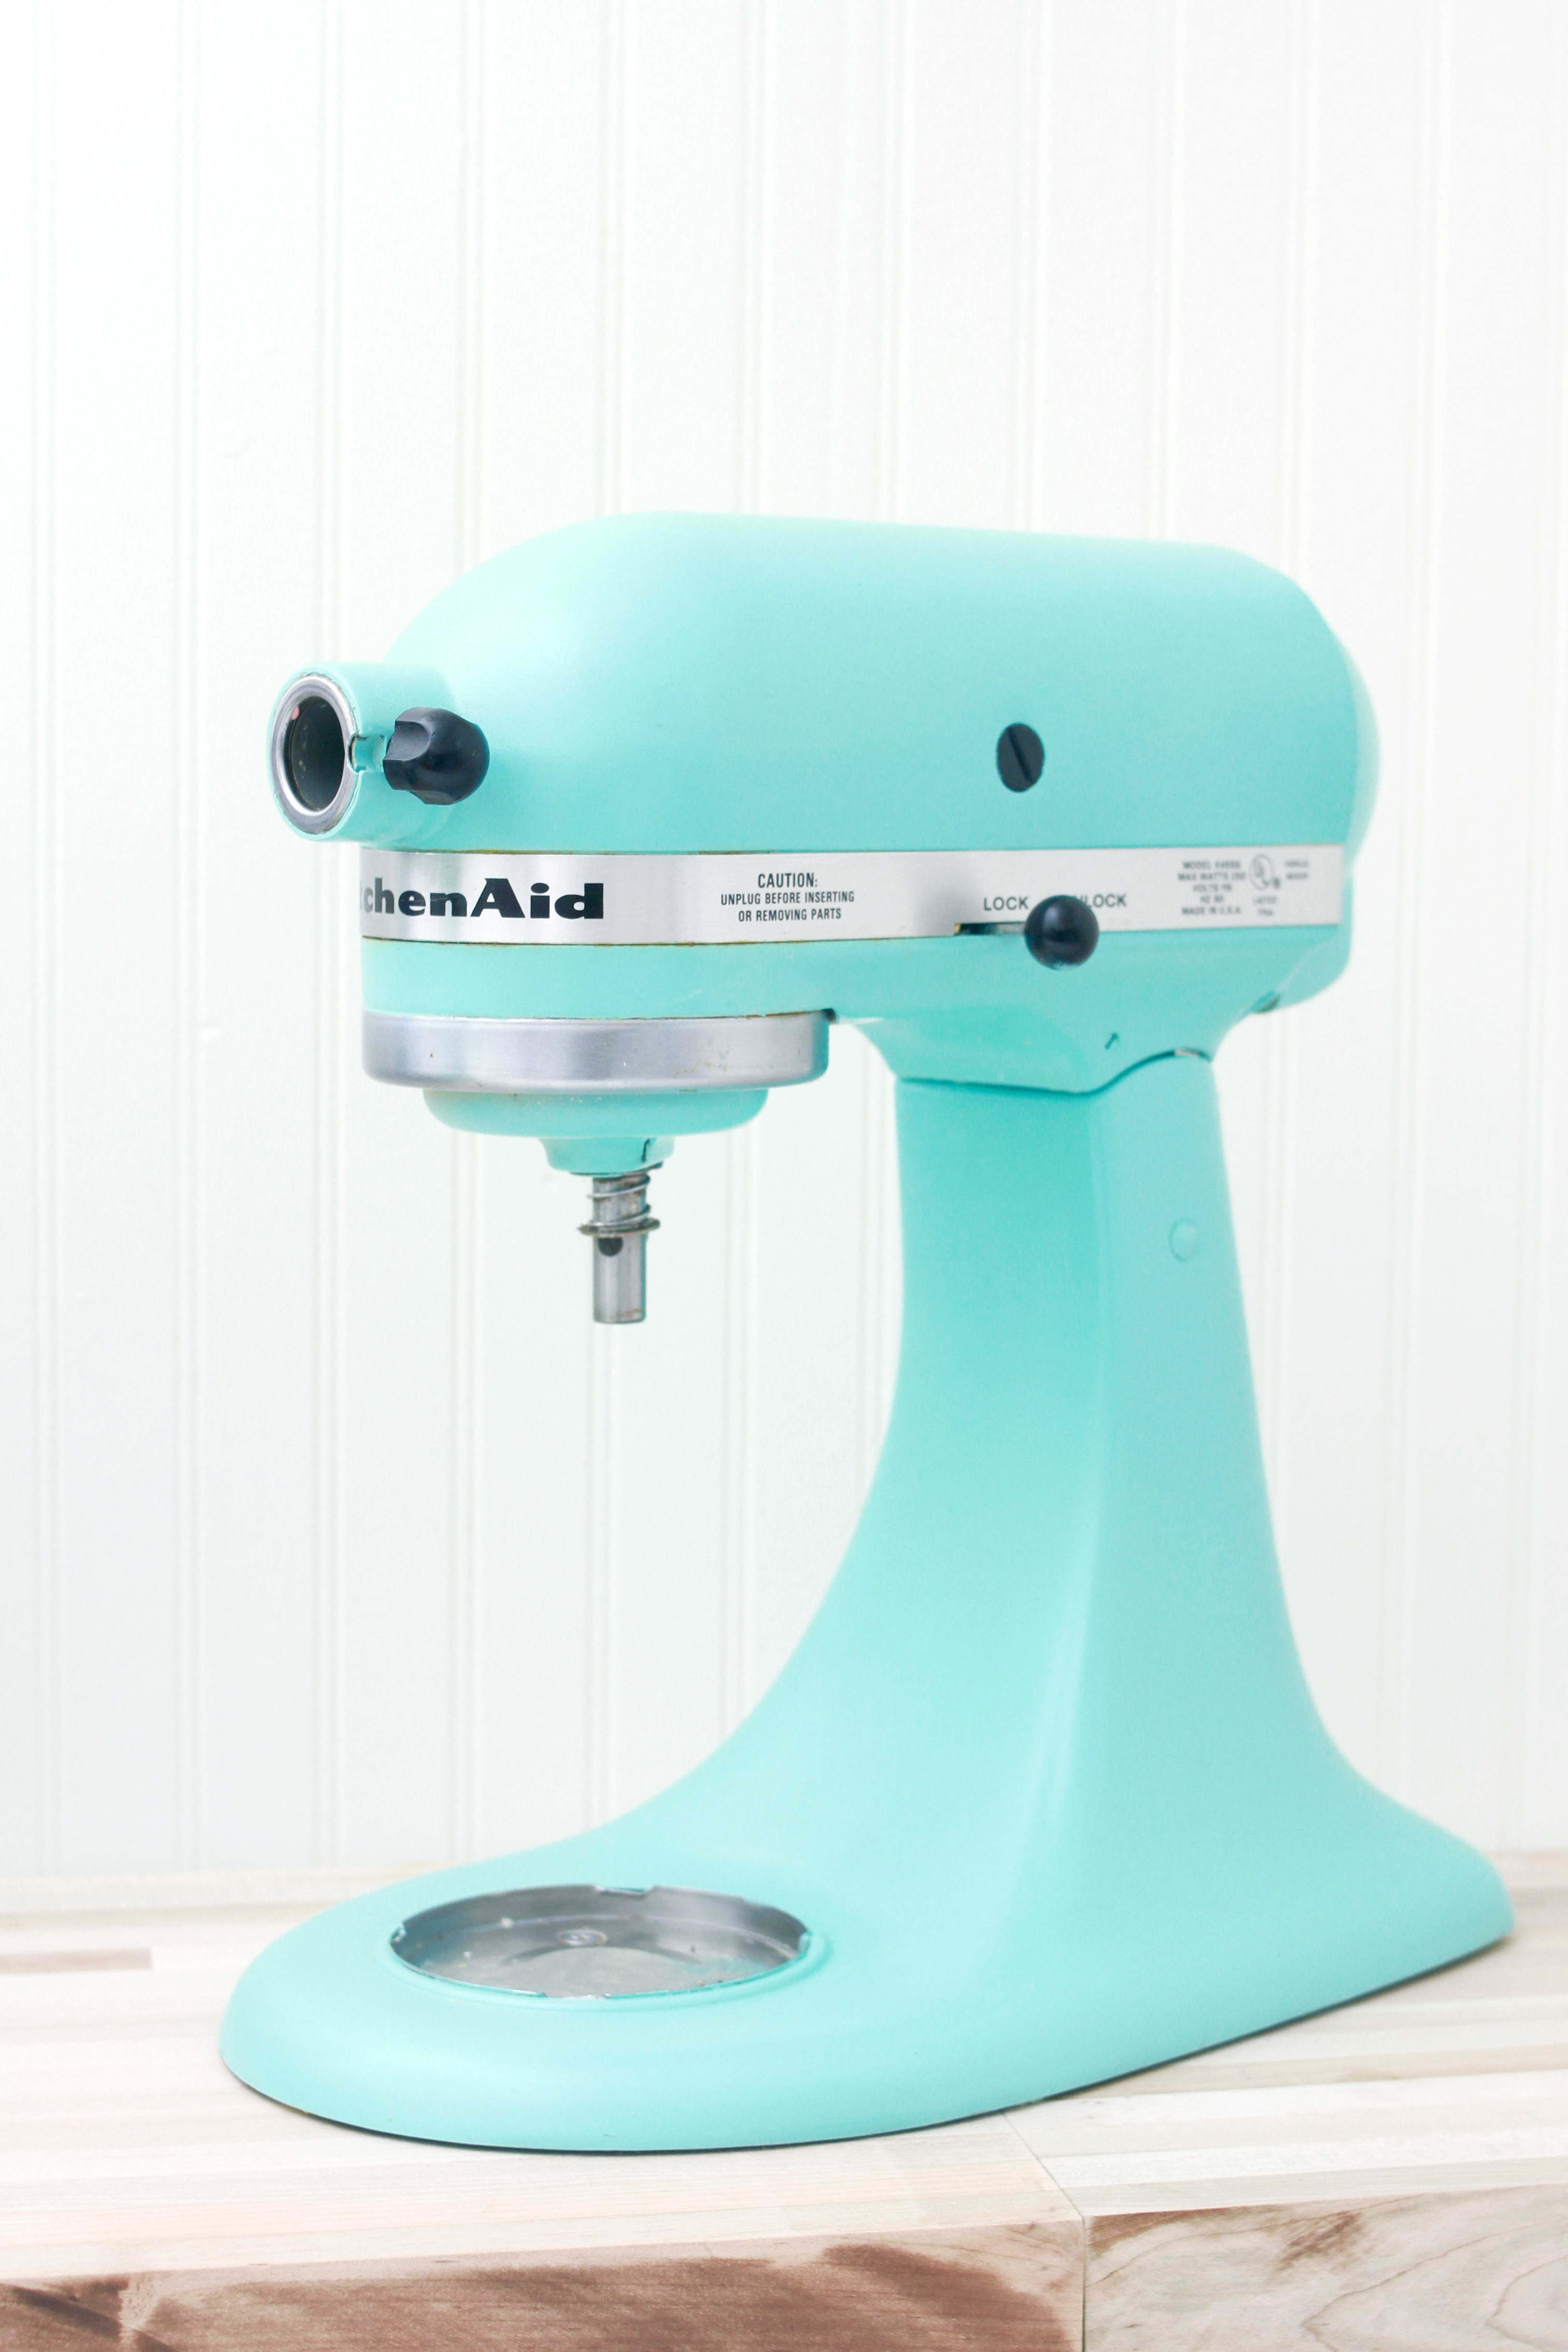 https://cdn.apartmenttherapy.info/image/upload/v1582130272/k/Edit/2020-03-I-Painted-My-KitchenAid-Stand-Mixer/lead.jpg